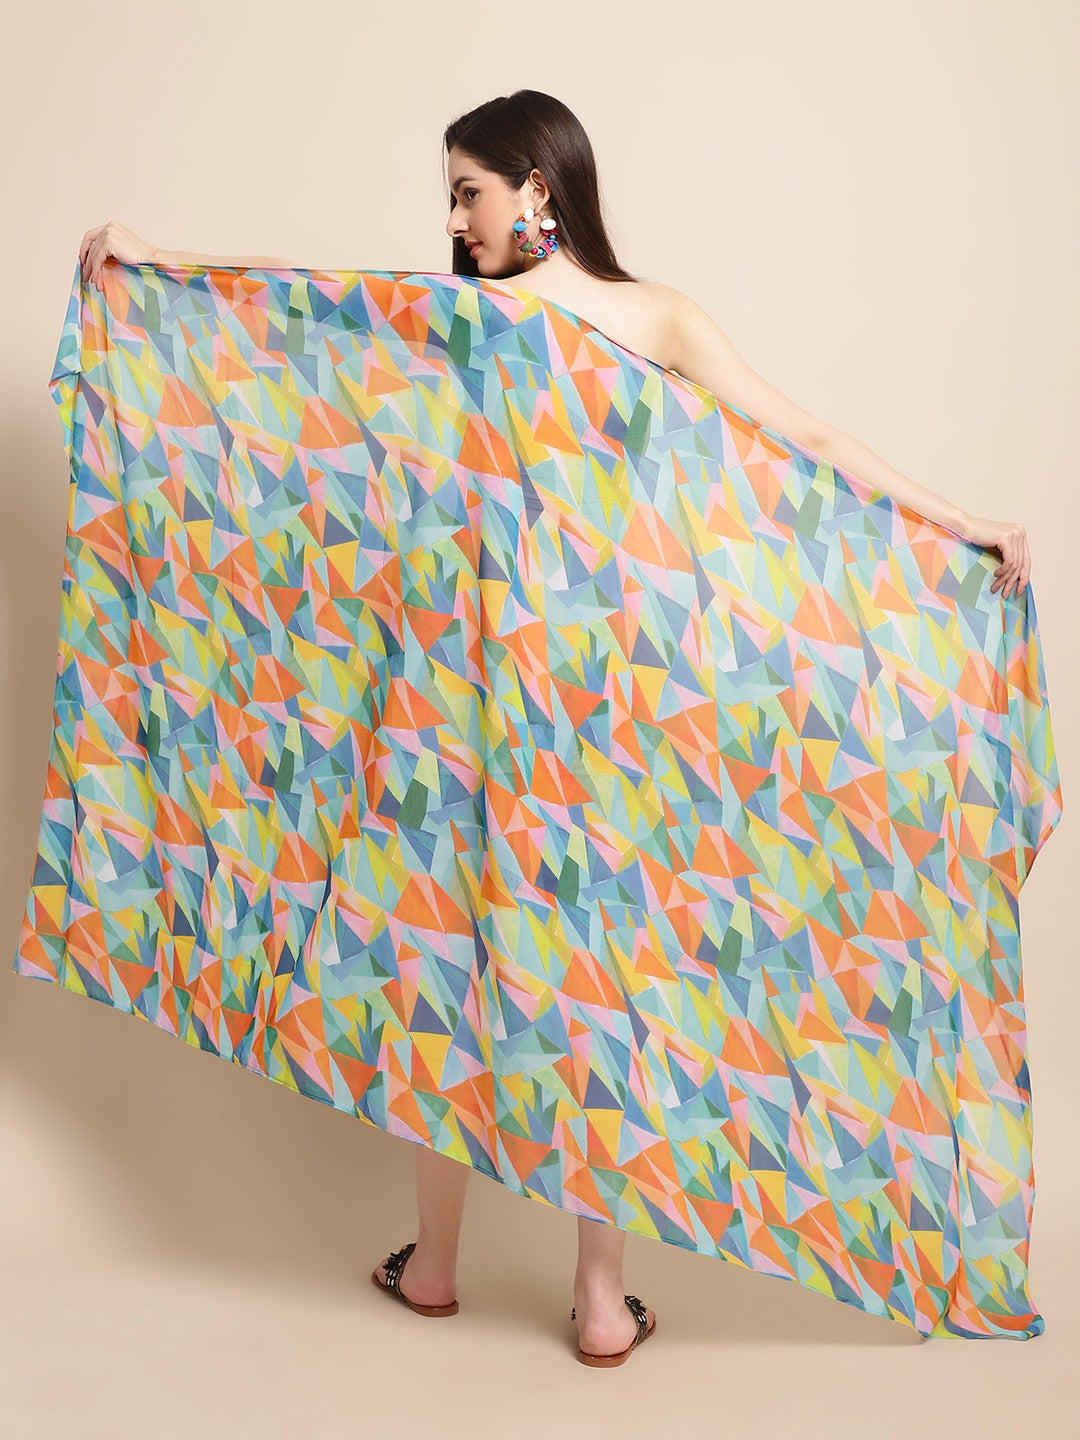 Multi Color Geometric Printed Georgette Swimwear Cover Up Sarong For Women Claura Designs Pvt. Ltd. Sarong Cover-up, Coverup, Free Size, georgette, multi color, Sarong, Swimwear